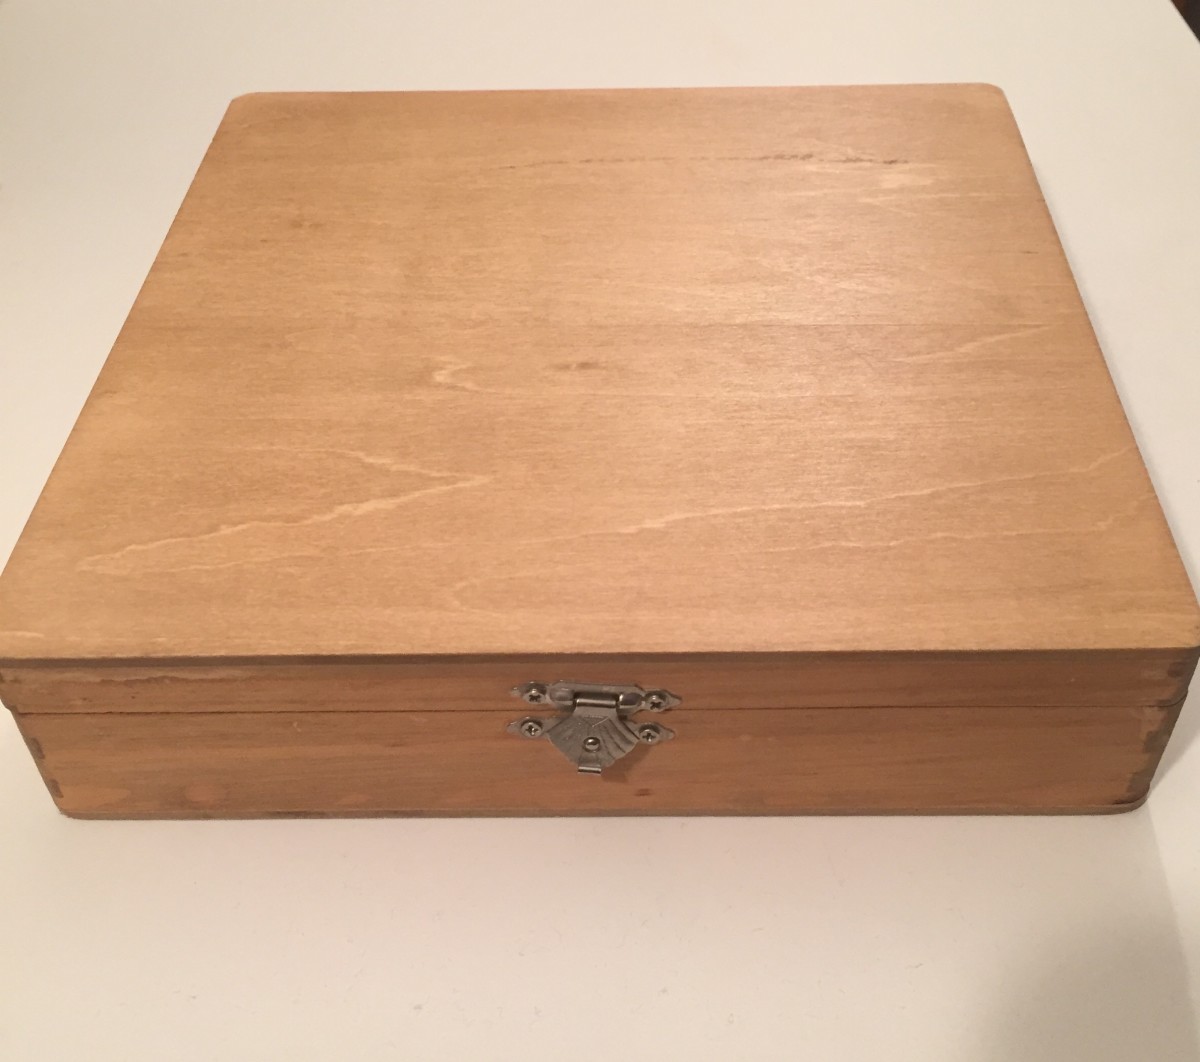 My 8" by 8" wooden box with a hinge.